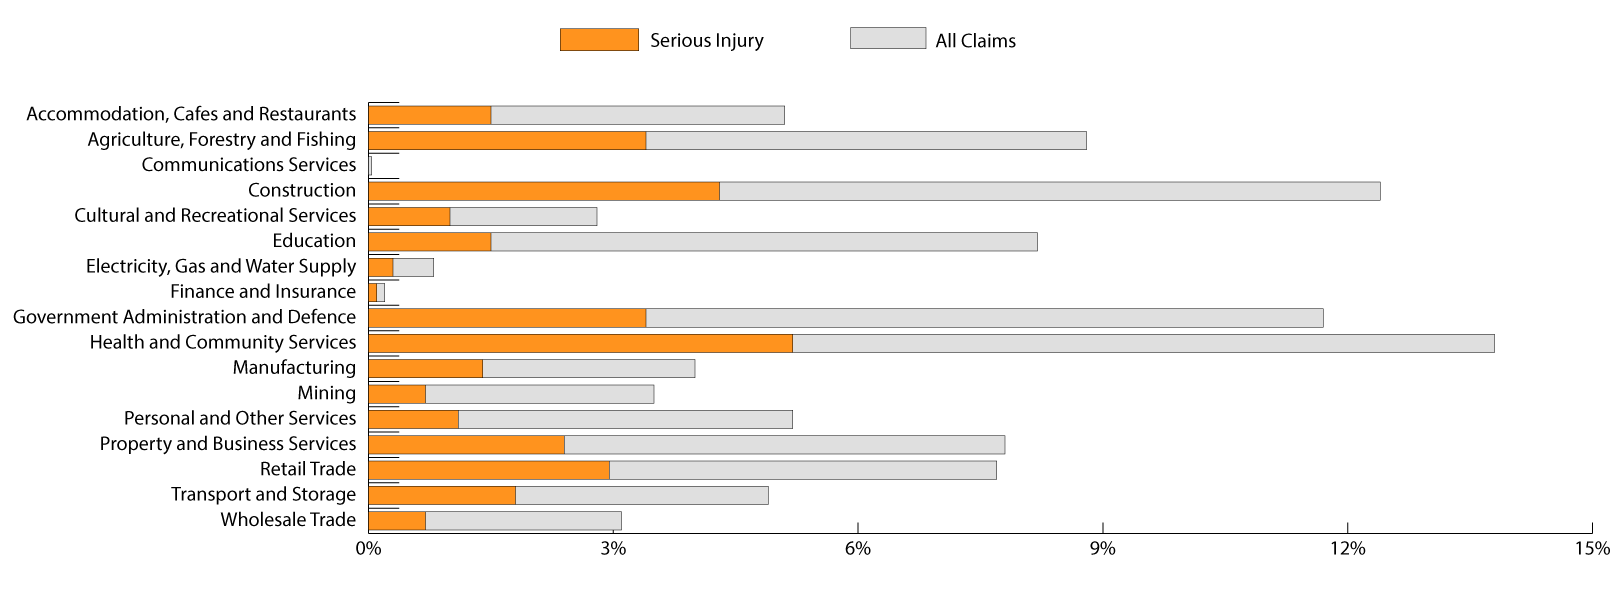 This bar graph shows the breakdown of workers compensation claims by Industry Groups. Accommodation, cafes and restaurants accounted for 5.2% of all Territory workers compensation claims, with 29.8% of those claims for a serious injury. Agriculture forestry & fishing accounted for 8.8% of all Territory workers compensation claims, with 38.9% of those claims for a serious injury. Communications services 0.04% of all Territory workers compensation claims, with no serious injury claims. Construction accounted for 12.3% of all Territory workers compensation claims, with 34.6% of those claims for a serious injury. Cultural and recreational services accounted for 2.8% of all Territory workers compensation claims, with 35.3% of those claims for a serious injury. Education accounted for 8.2% of all Territory workers compensation claims, with 17.9% of those claims for a serious injury. Electricity, gas and water supply accounted for 0.8% of all Territory workers compensation claims, with 38.9% of those claims for a serious injury. Finance and insurance accounted for 0.2% of all Territory workers compensation claims, with 50% of those claims for a serious injury. Government administration and defence accounted for 11.7% of all Territory workers compensation claims, with 29.2% of those claims for a serious injury. Health and community services accounted for 13.8% of all Territory workers compensation claims, with 37.7% of those claims for a serious injury. Manufacturing accounted for 4.1% of all Territory workers compensation claims, with 35.1% of those claims for a serious injury. Mining accounted for 3.5% of all Territory workers compensation claims, with 20.2% of those claims for a serious injury. Personal and other services accounted for 5.2% of all Territory workers compensation claims, with 20.2% of those claims for a serious injury. Property and business services accounted for 7.8% of all Territory workers compensation claims, with 31% of those claims for a serious injury. Retail trade accounted for 7.7% of all Territory workers compensation claims, with 38.3% of those claims for a serious injury. Transport and storage accounted for 4.9% of all Territory workers compensation claims, with 36.8% of those claims for a serious injury. Wholesale trade accounted for 3.1% of all Territory workers compensation claims, with 21.9% of those claims for a serious injury.